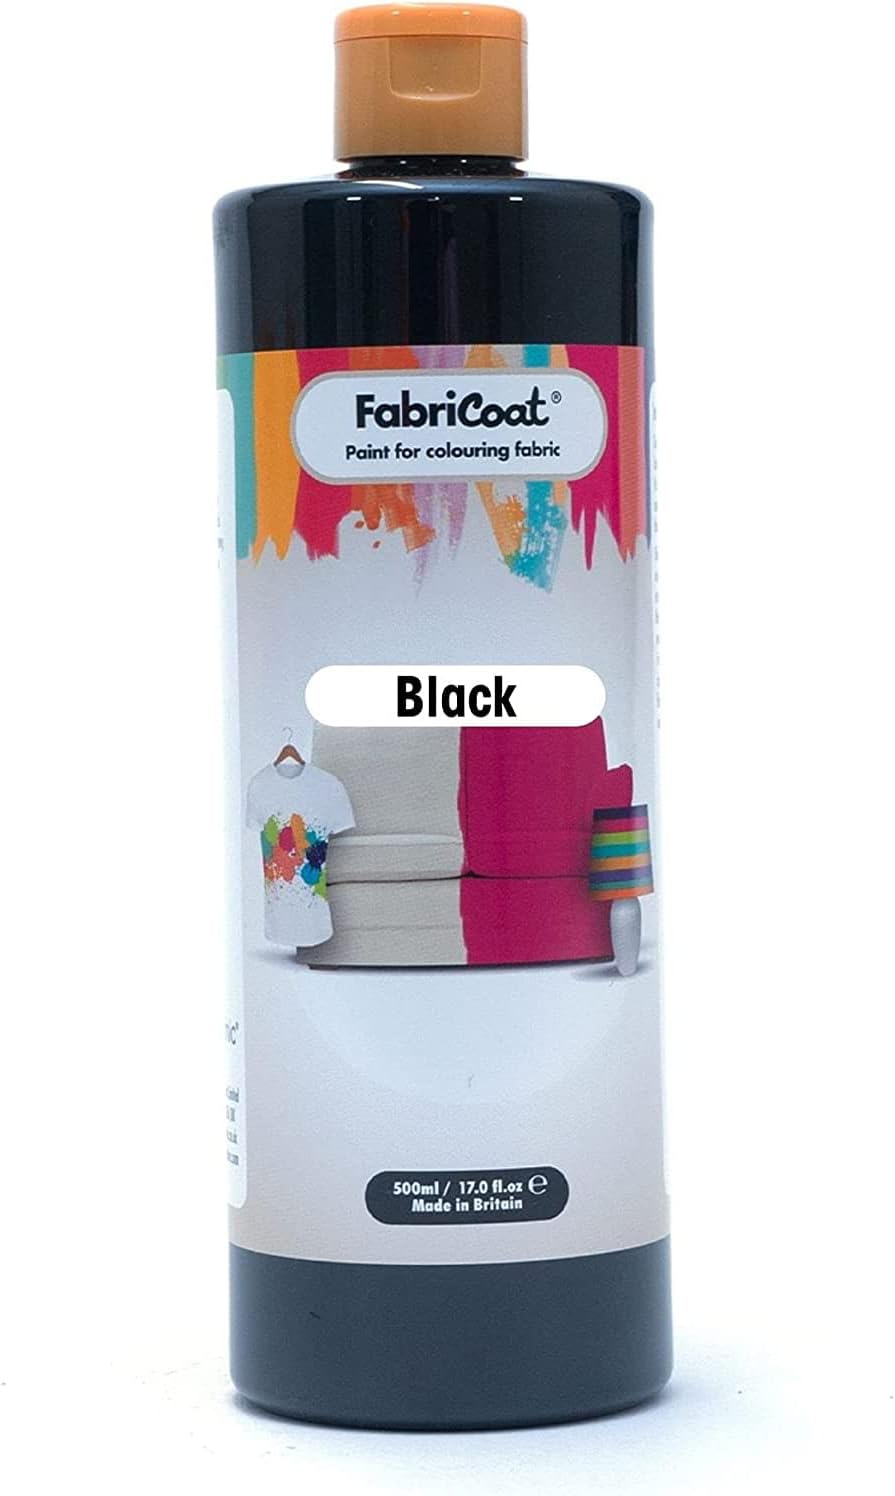 FabriCoat Dark Fabric Paint - Used for Restoring or [...]